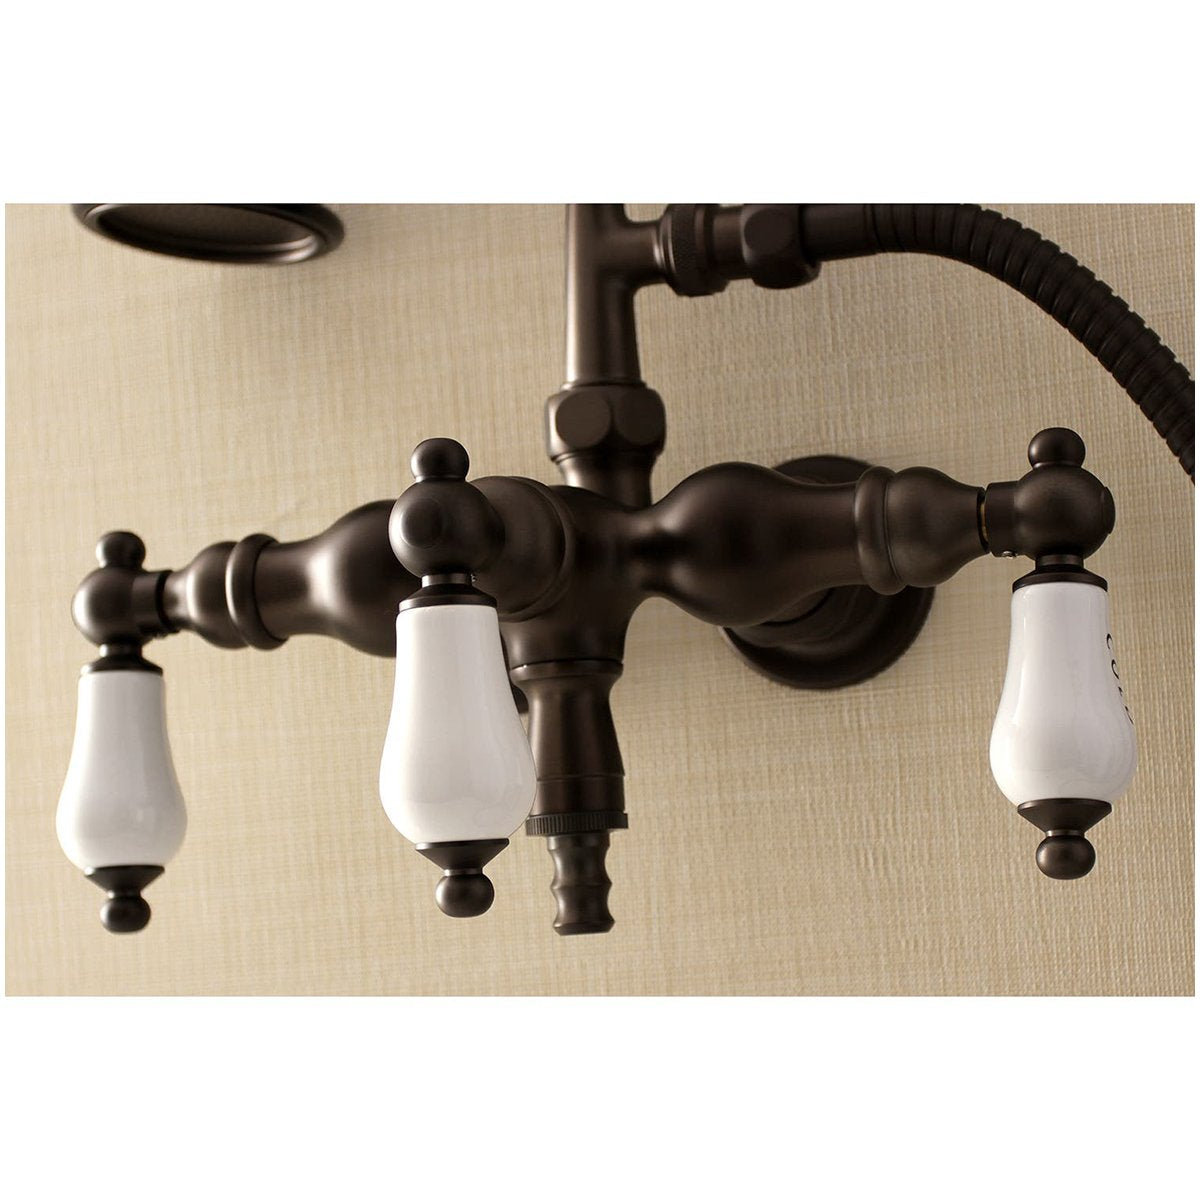 Aqua Vintage AE21TX-P 3-3/8-Inch Wall Mount Tub Faucet with Hand Shower